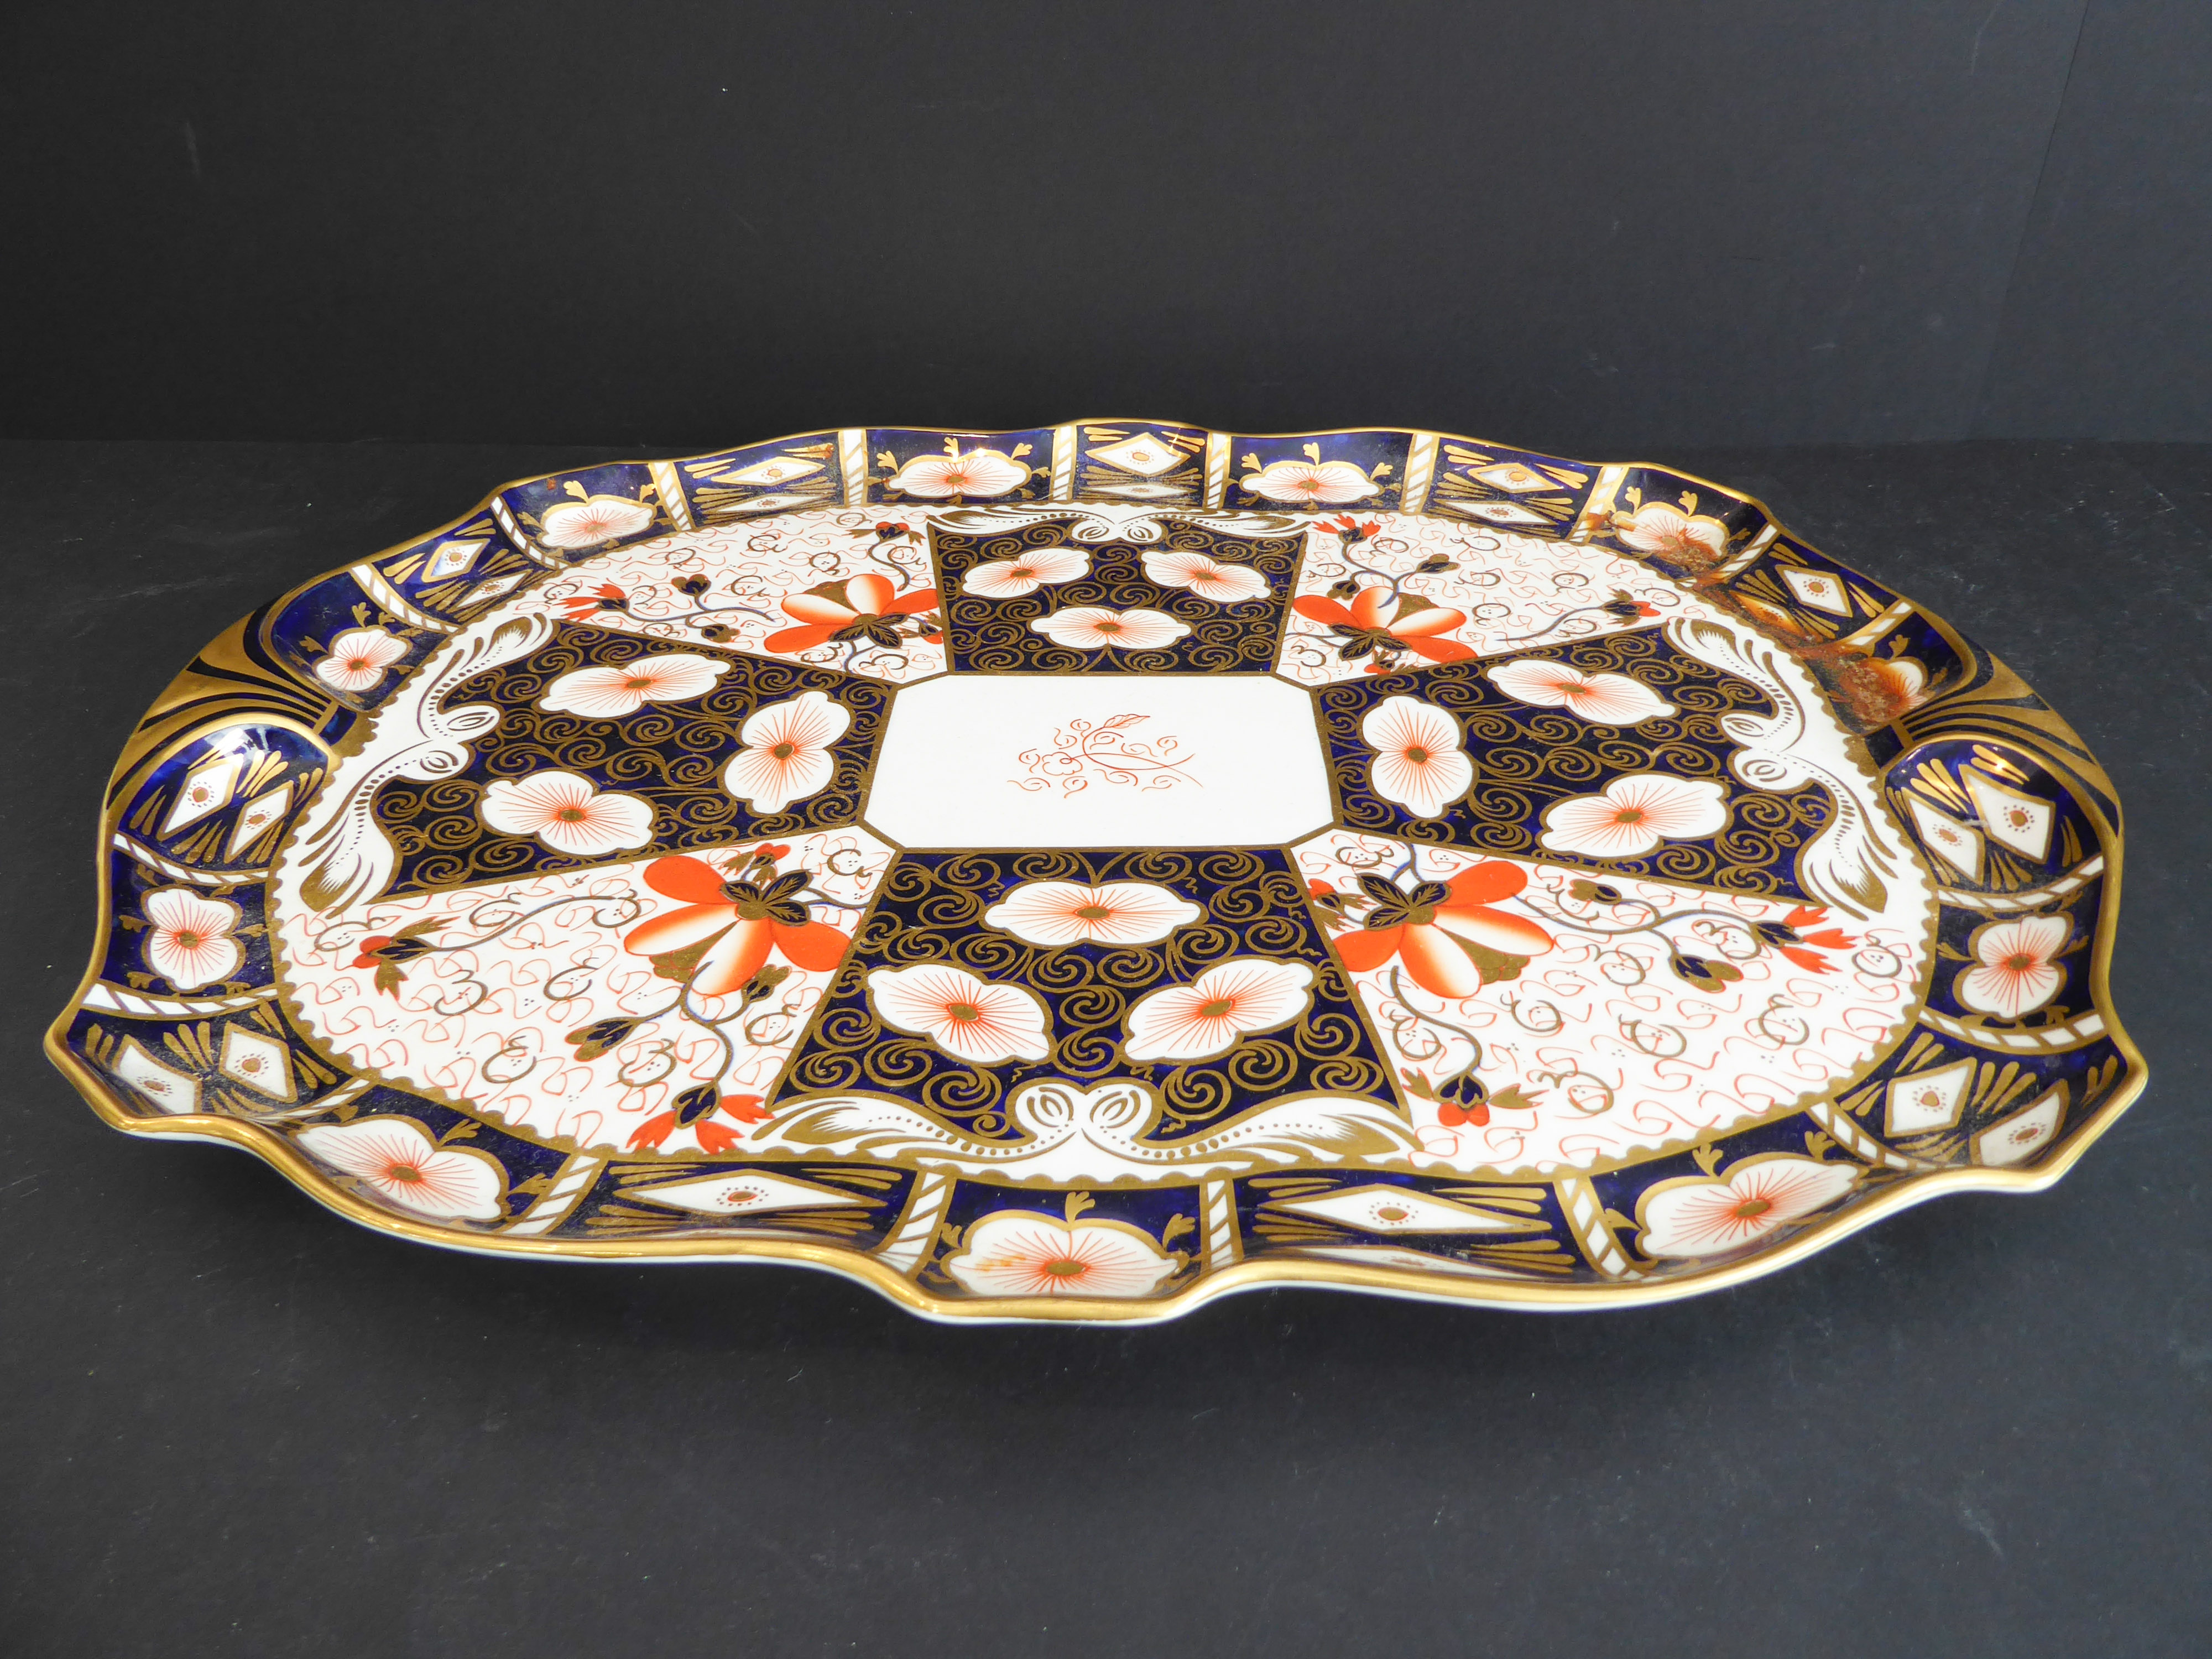 A large Royal Crown Derby porcelain serving tray: hand-gilded and decorated in the Imari palette (